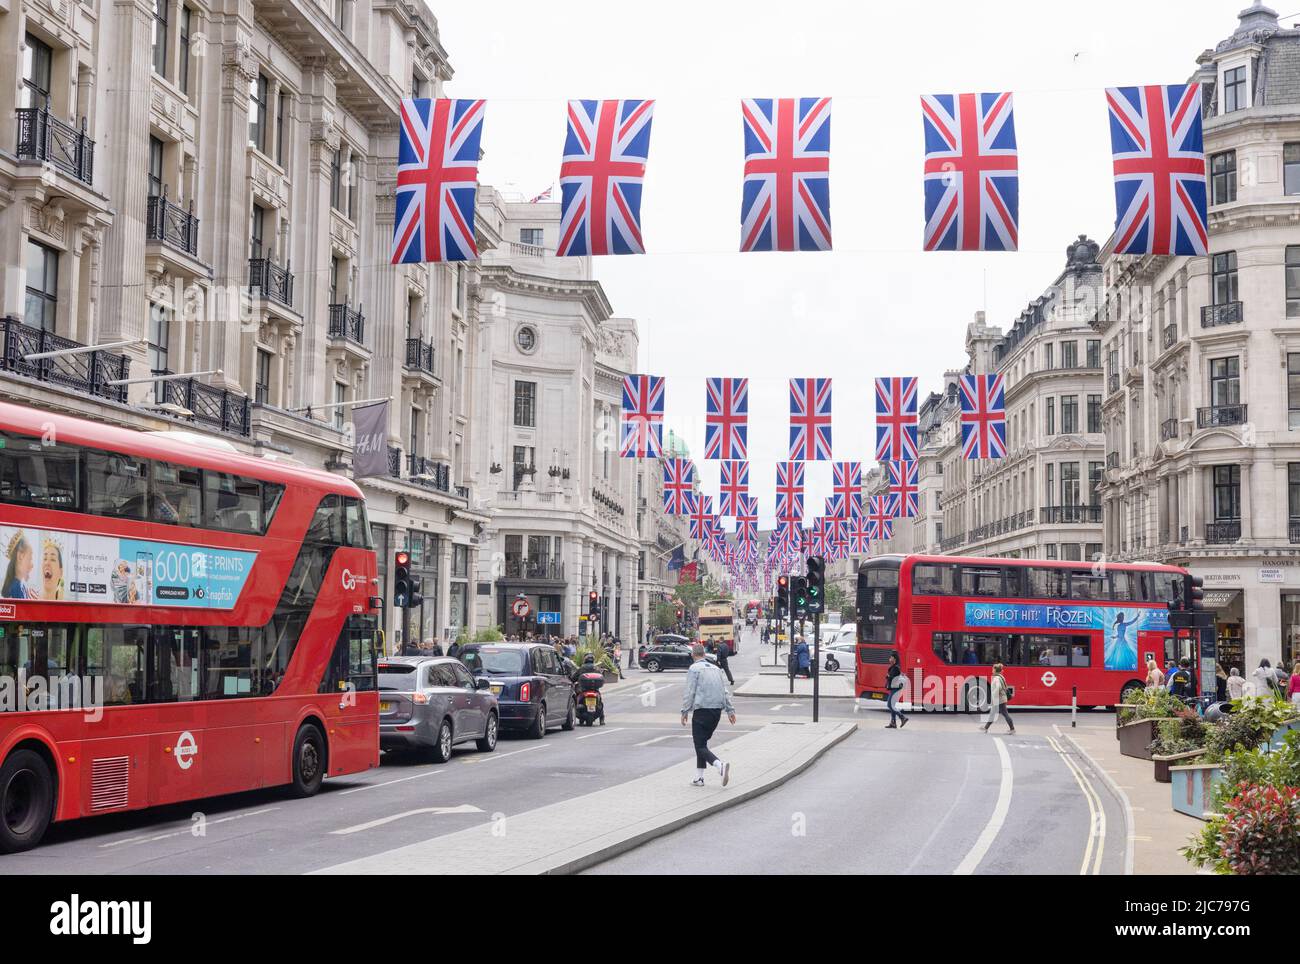 Queen Elizabeth Platinum Jubilee - London buses and street decorations with Union Jack Flags on Regent Street, Central London UK Stock Photo